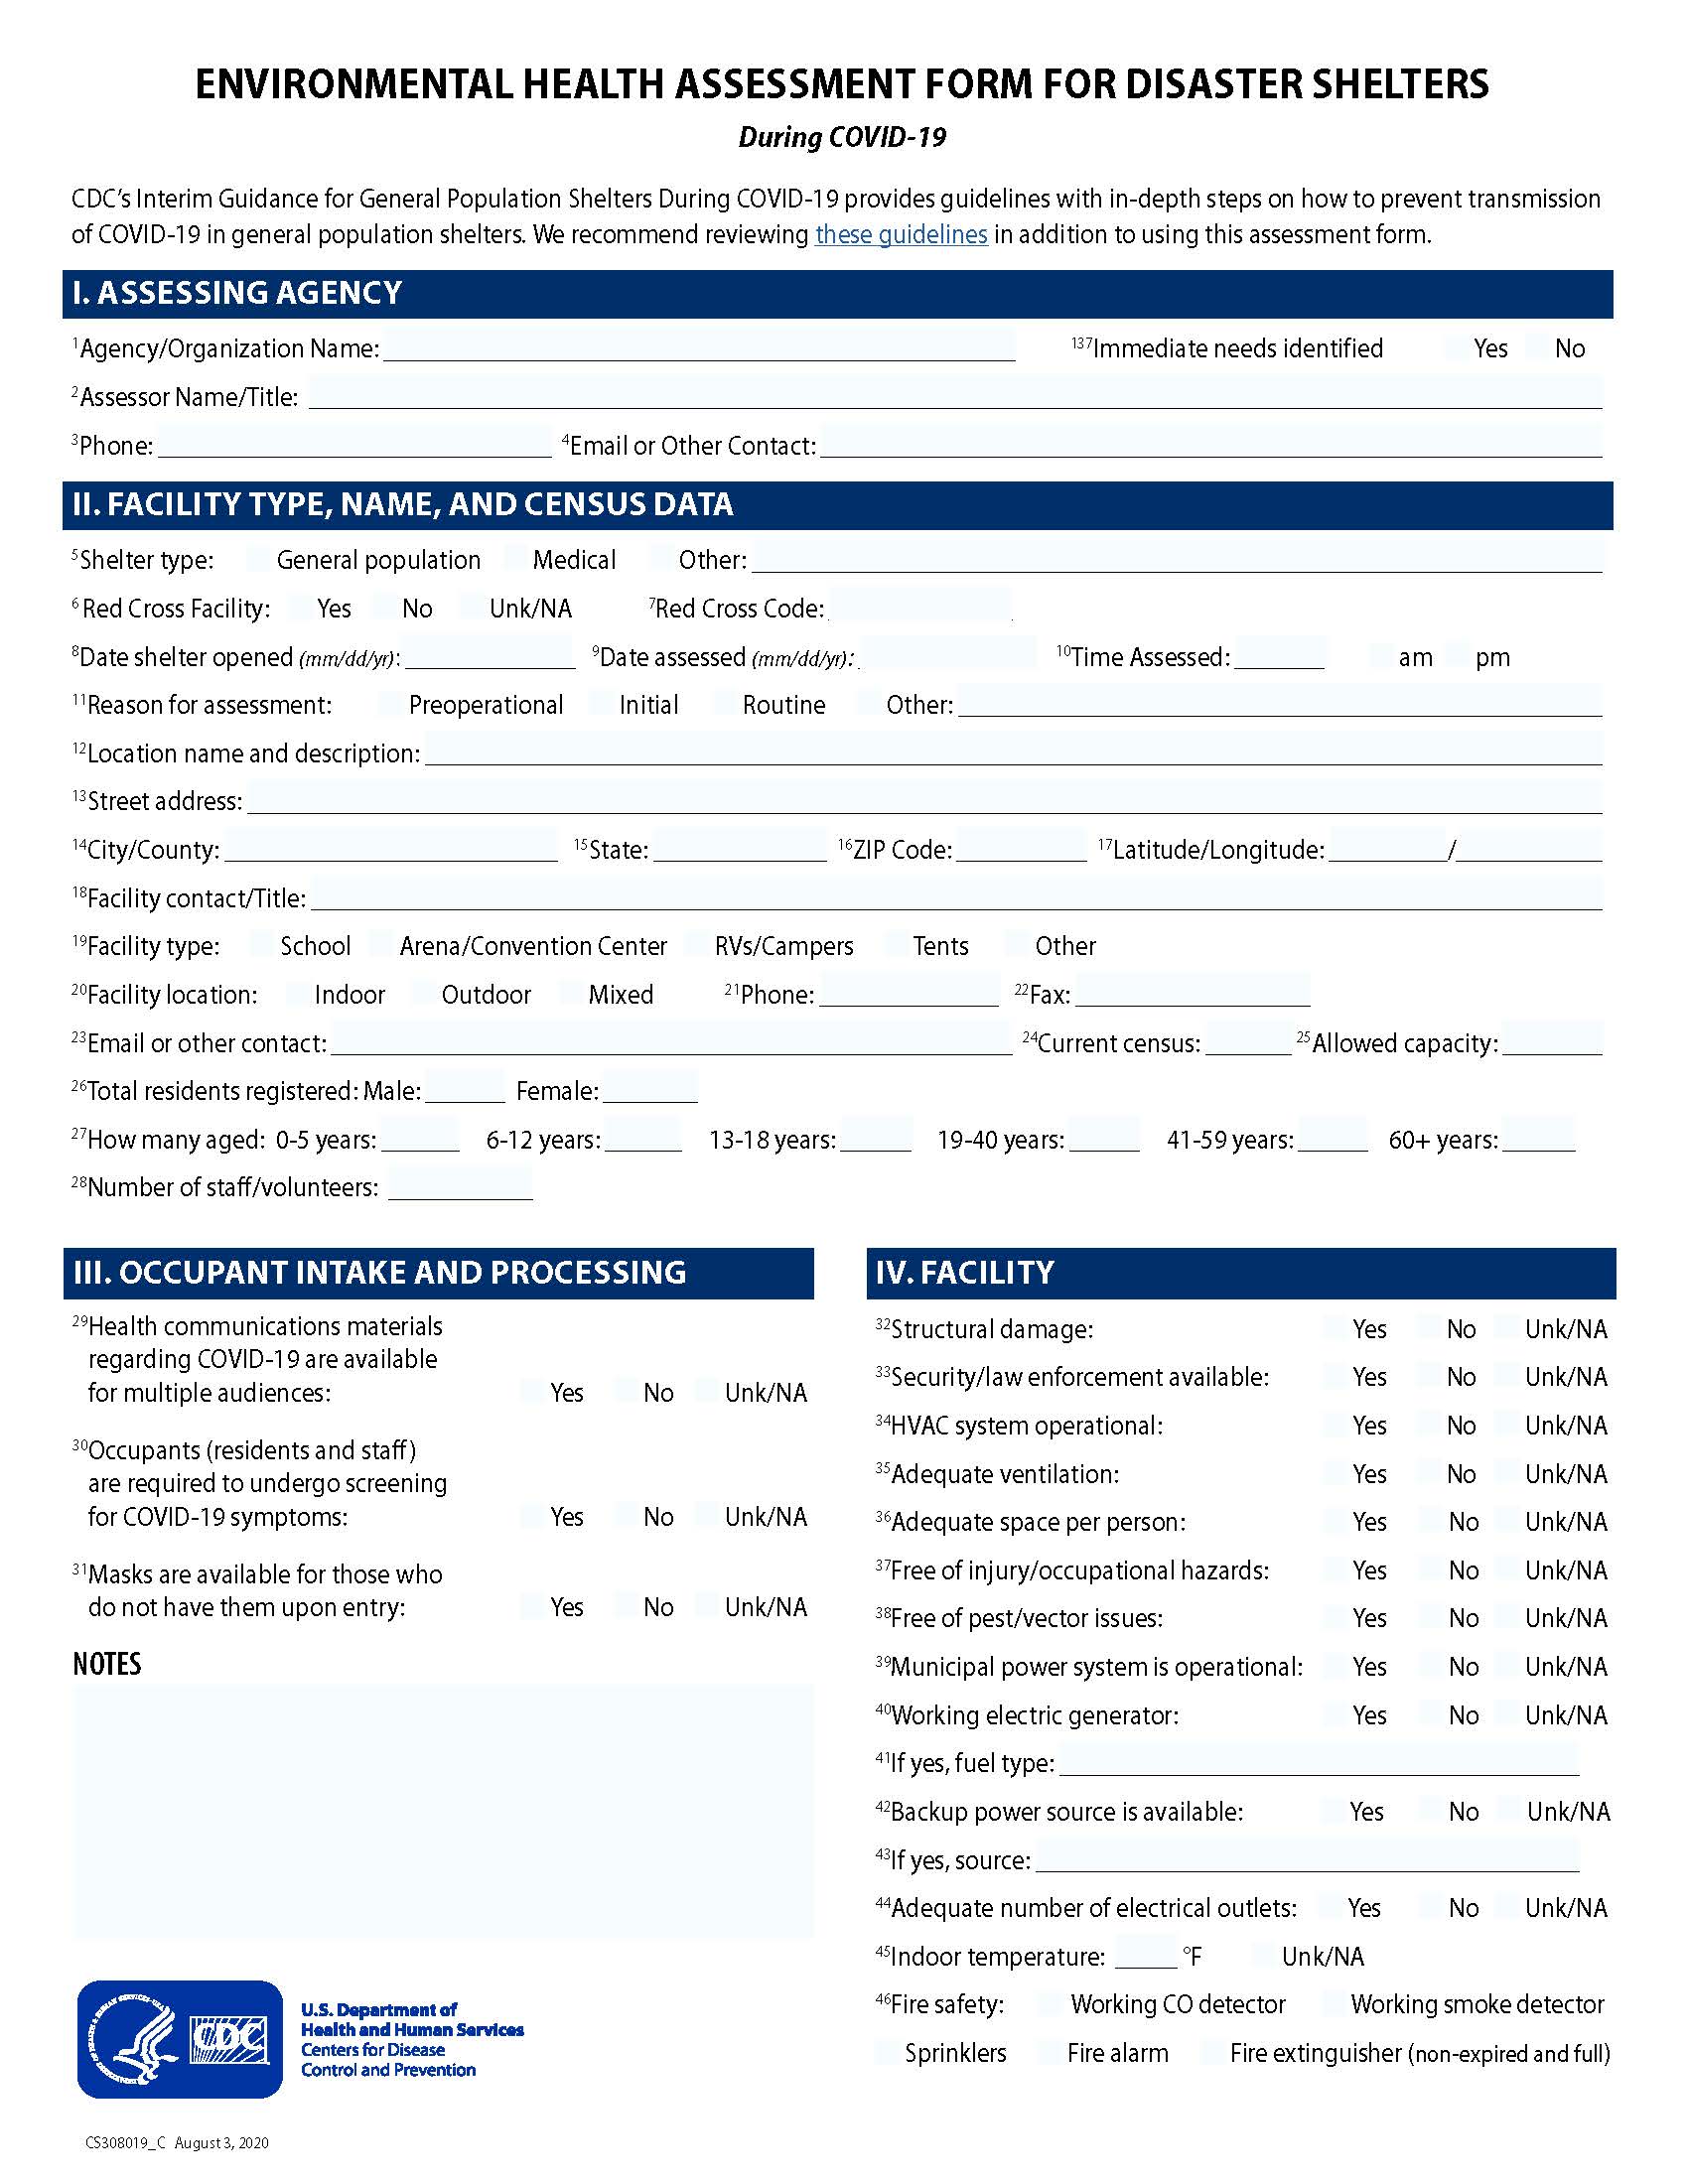 Environmental Health Assessment Form for Disaster Shelters during COVID 19